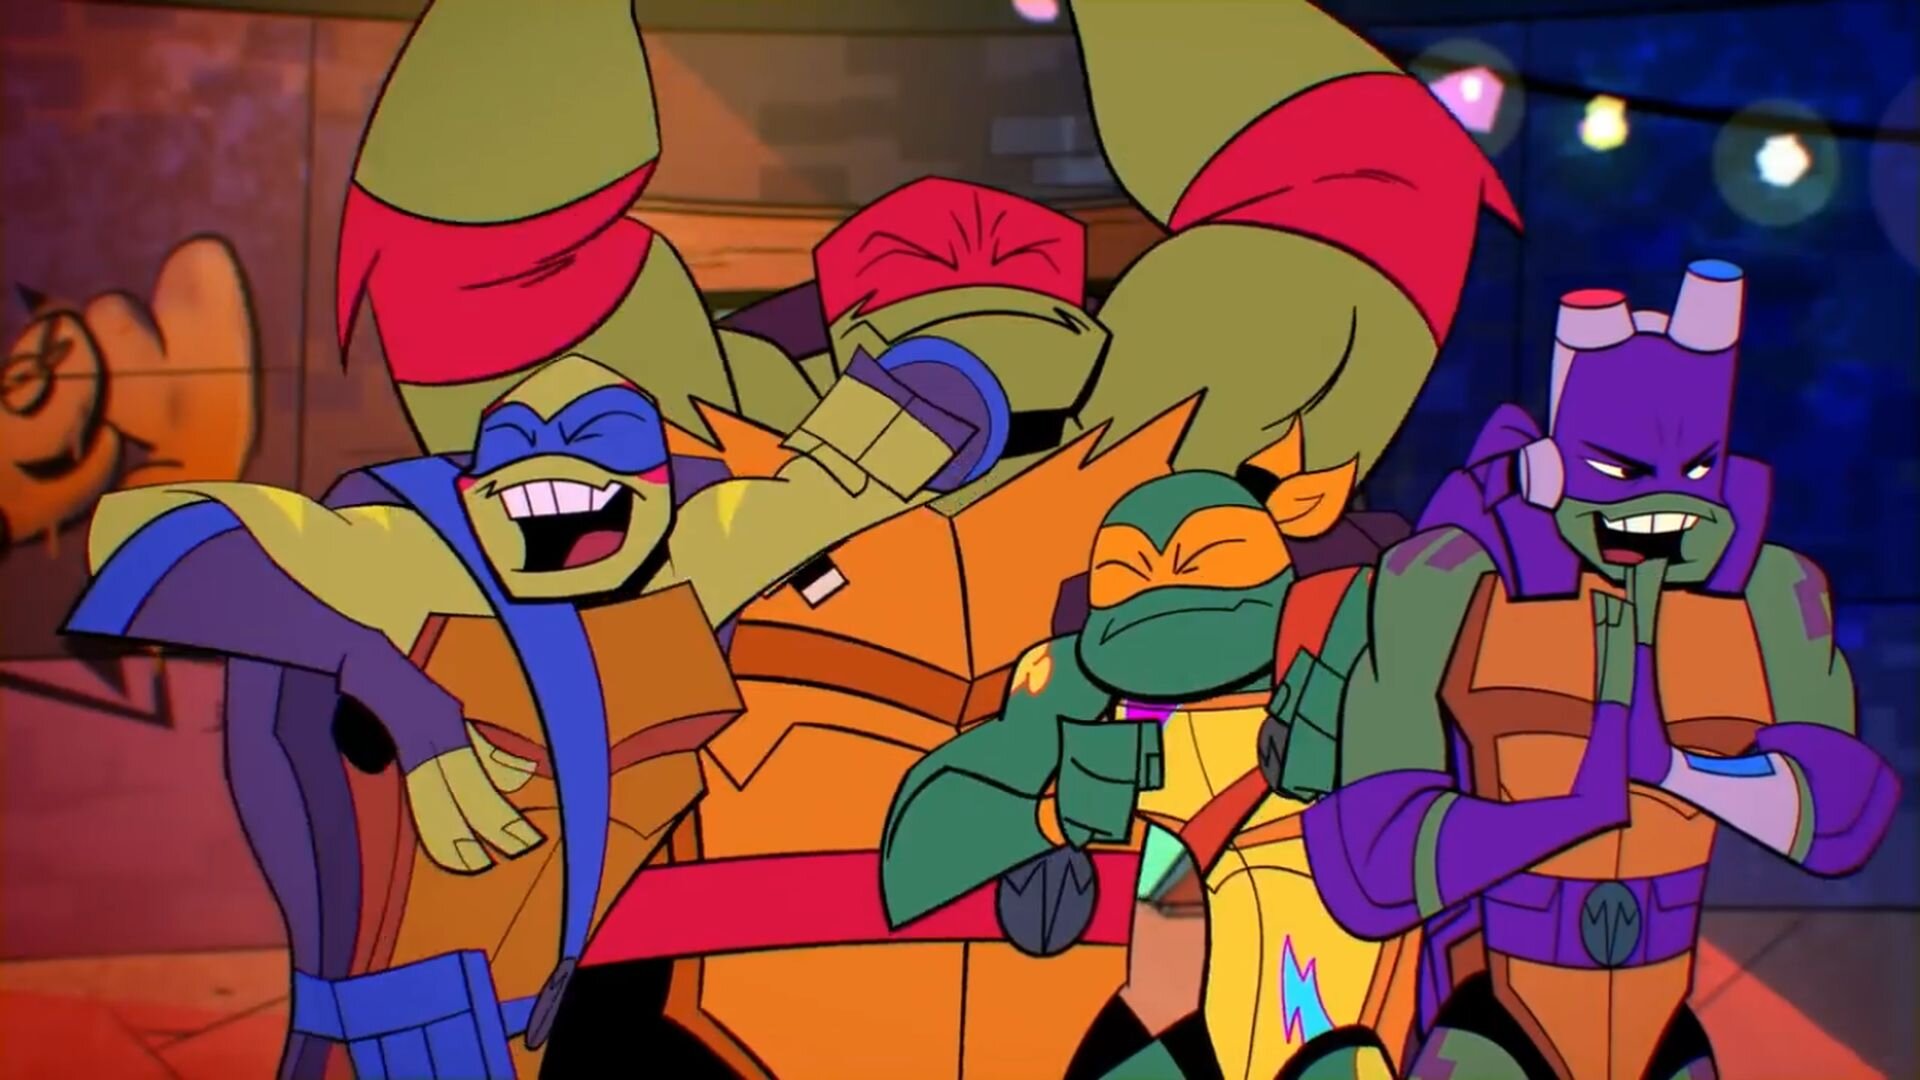 We Get an Official Synopsis for RISE OF THE TEENAGE MUTANT NINJA